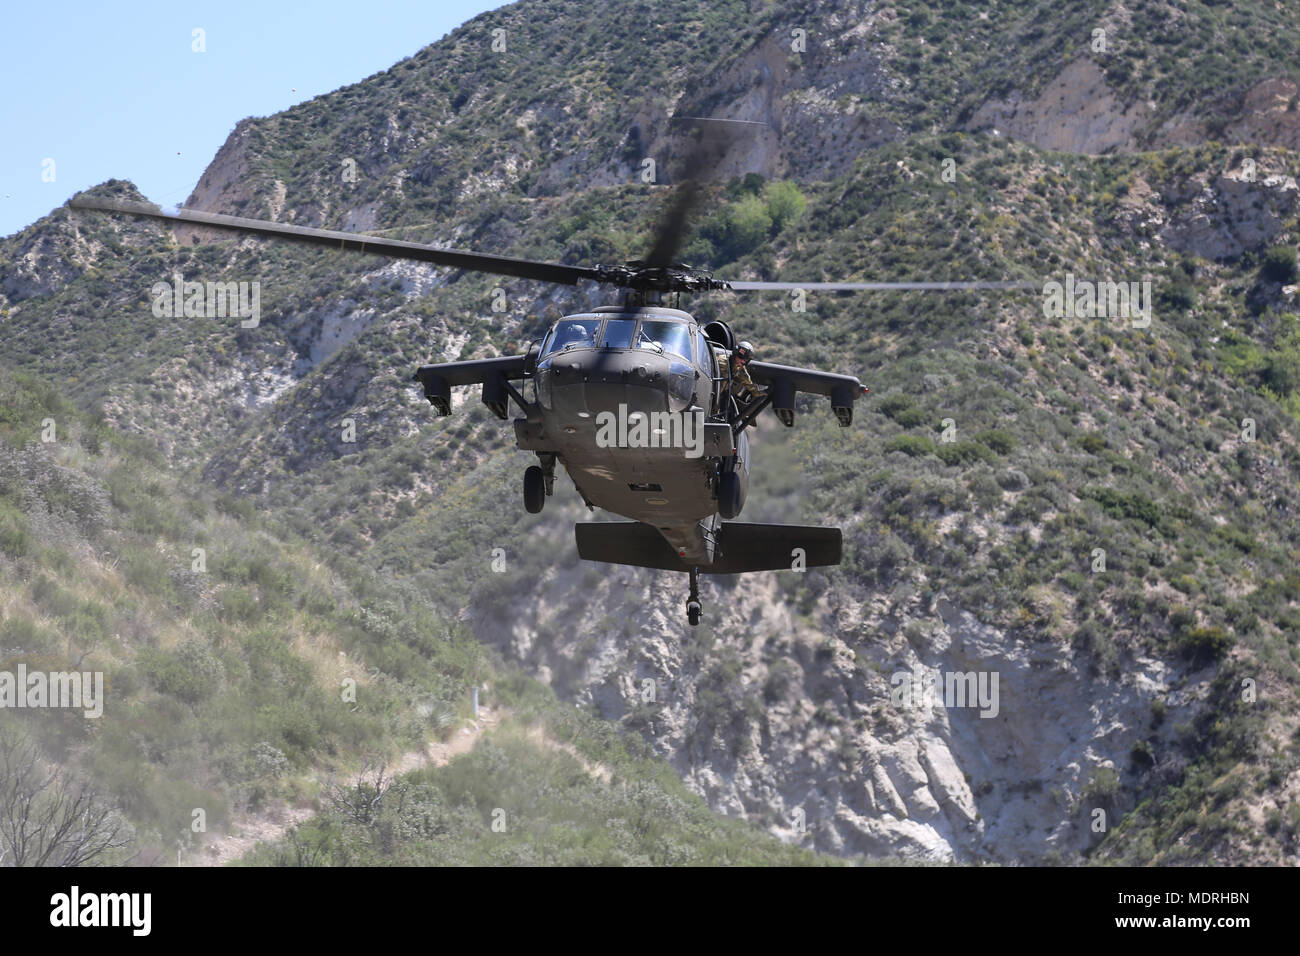 U.S. Army Black Hawk prepares to land at Big Tujunga Dam Ca., Apr. 18, 2018. The Prominent Hunt 18-1 exercise brings in federal, state, and local agencies to confirm the oncoming 20th CBRNE Ground Collection Team as well as enable other Task Force members to conduct collective and individual training as part of the National Technical Nuclear Forensics (NTNF) Ground Collection Task Force (GCTF). (U.S. Army photo by Pfc. Julie Driver) Stock Photo